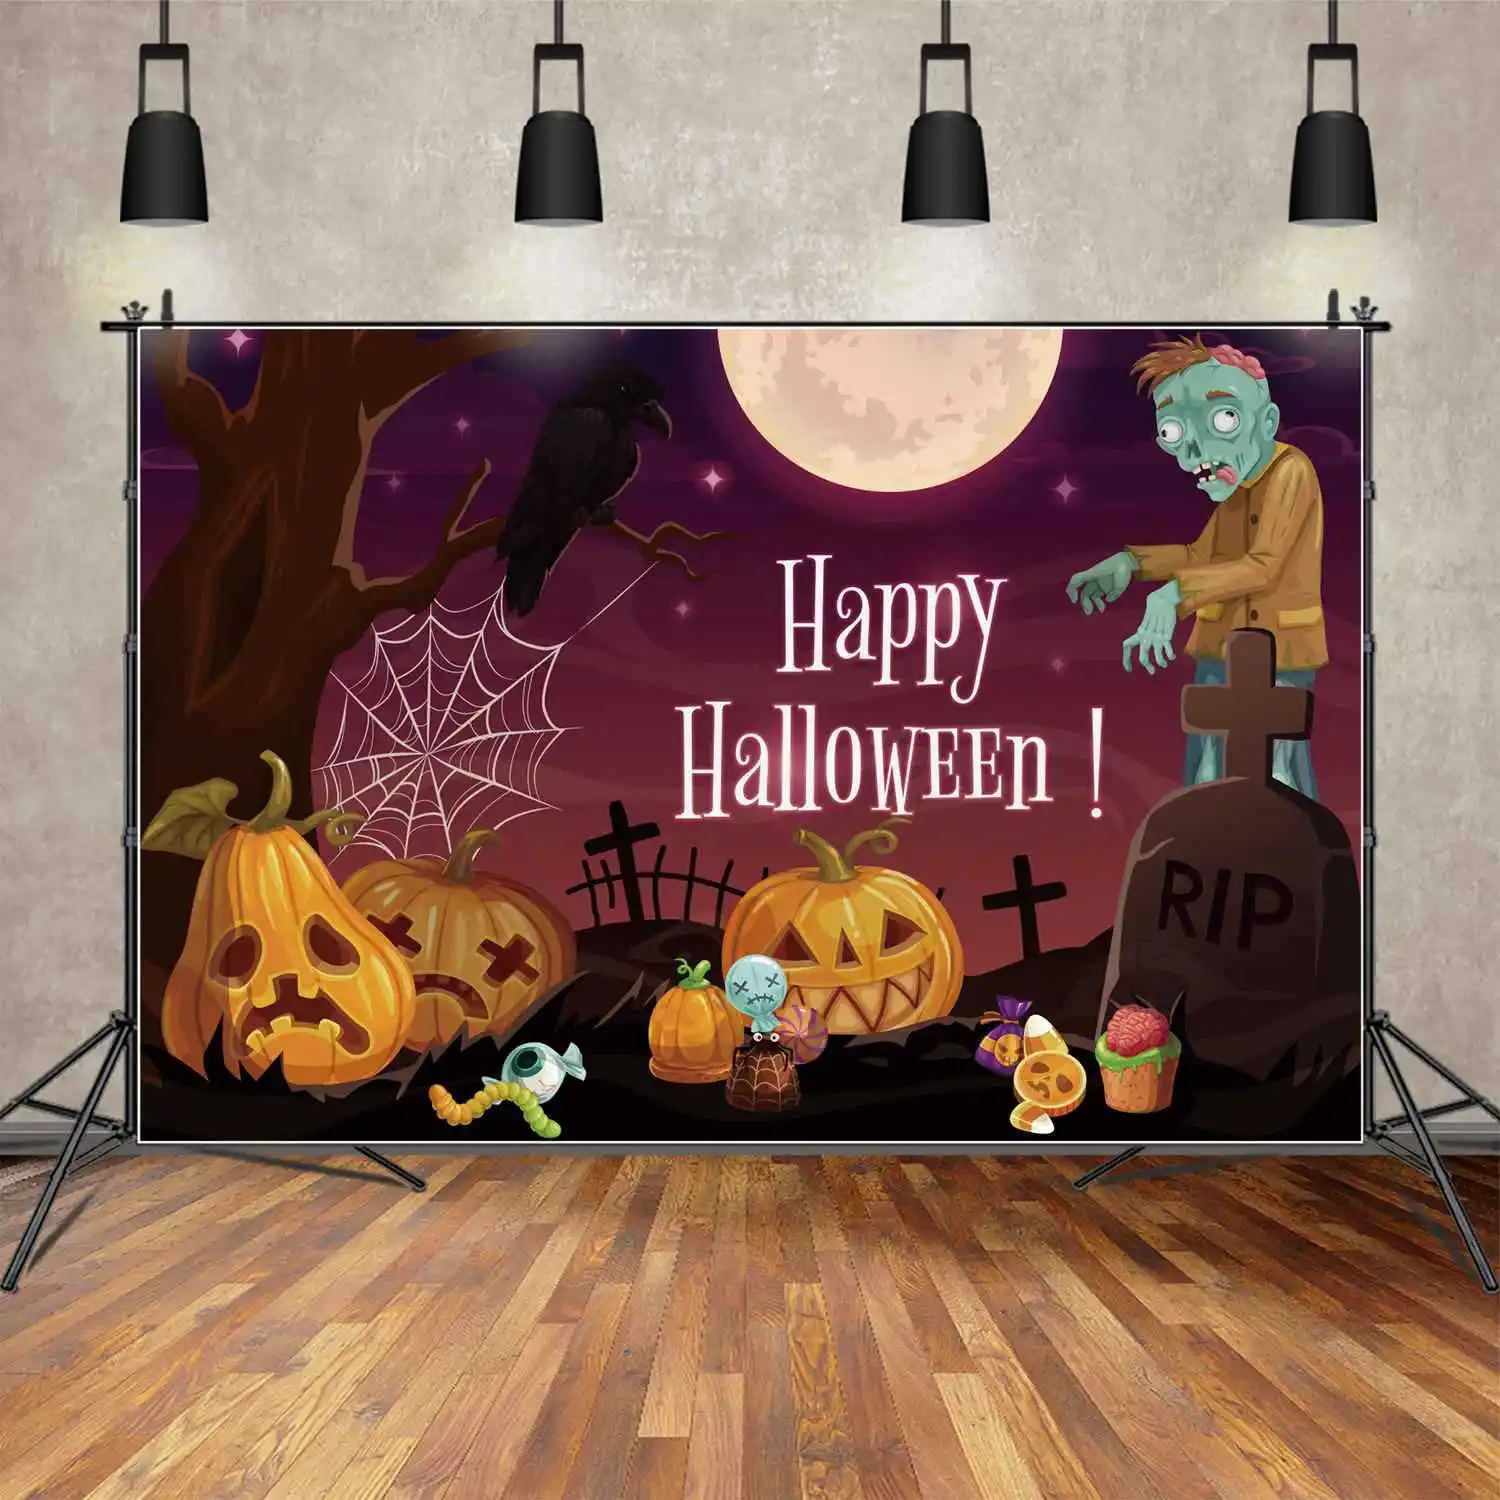 

MOON.QG Backdrop Happy Halloween Banner Party Decoration Background Baby Spider Web Jack O Lantern Tombstone Crow Photo Booth